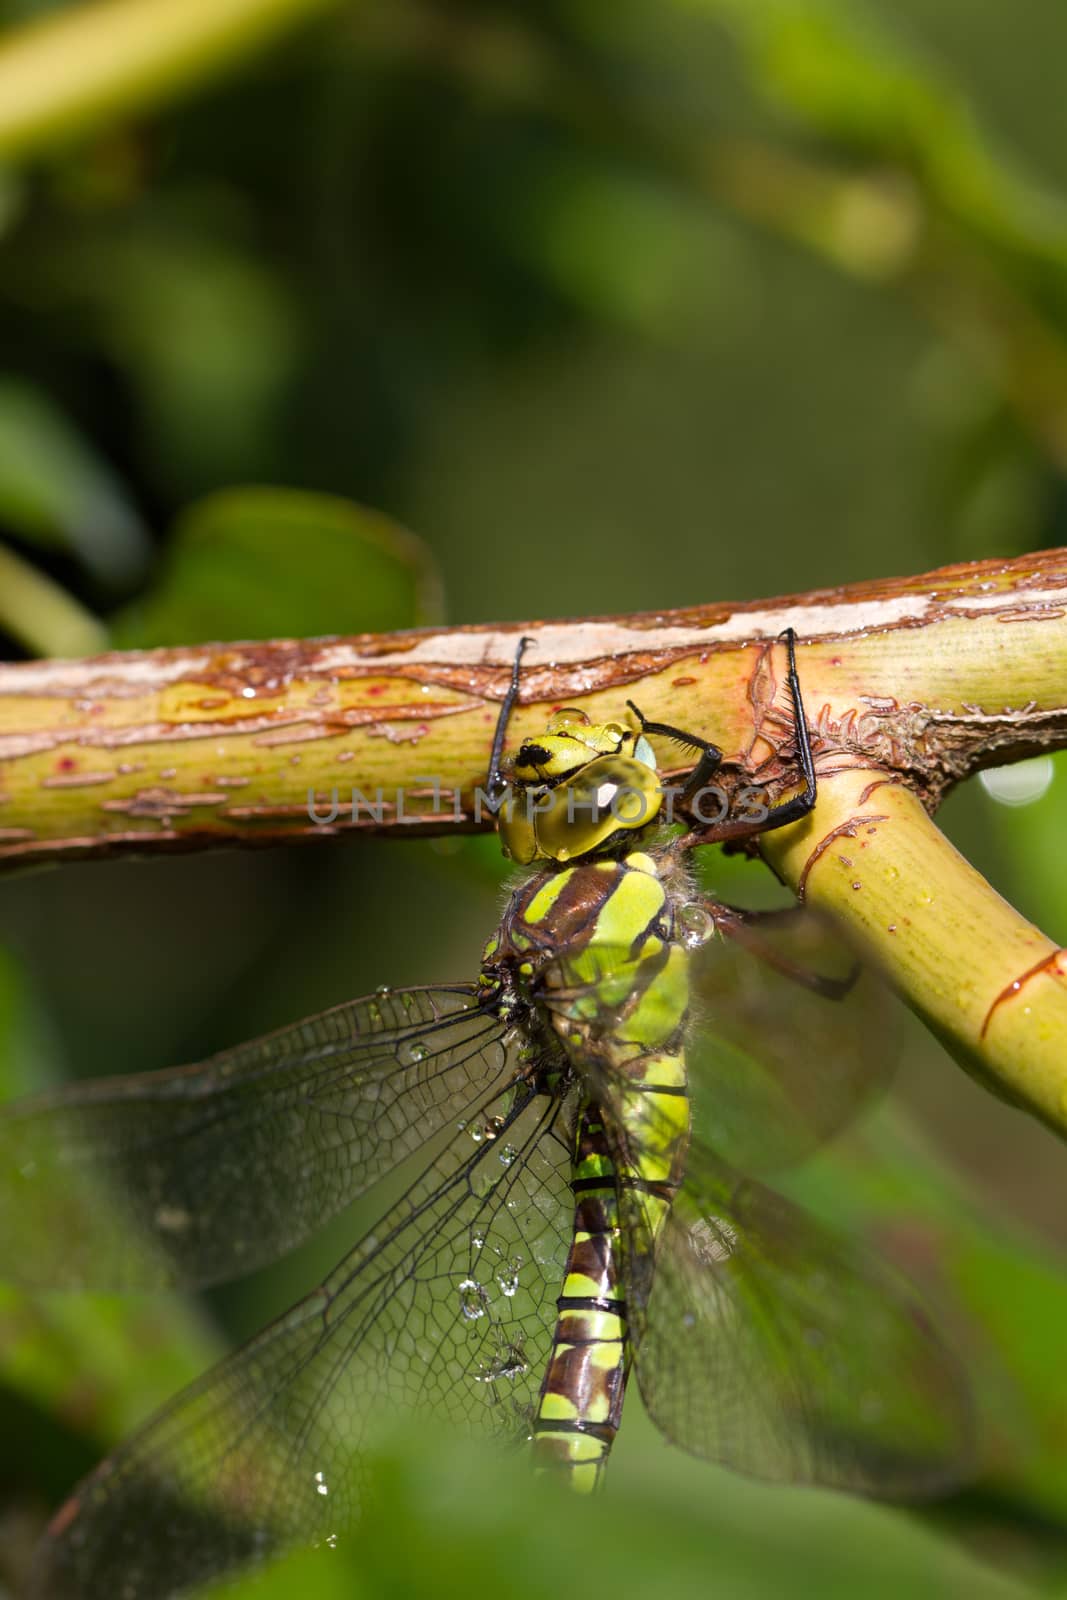 Dragonfly in extreme closeup by abeckman2706